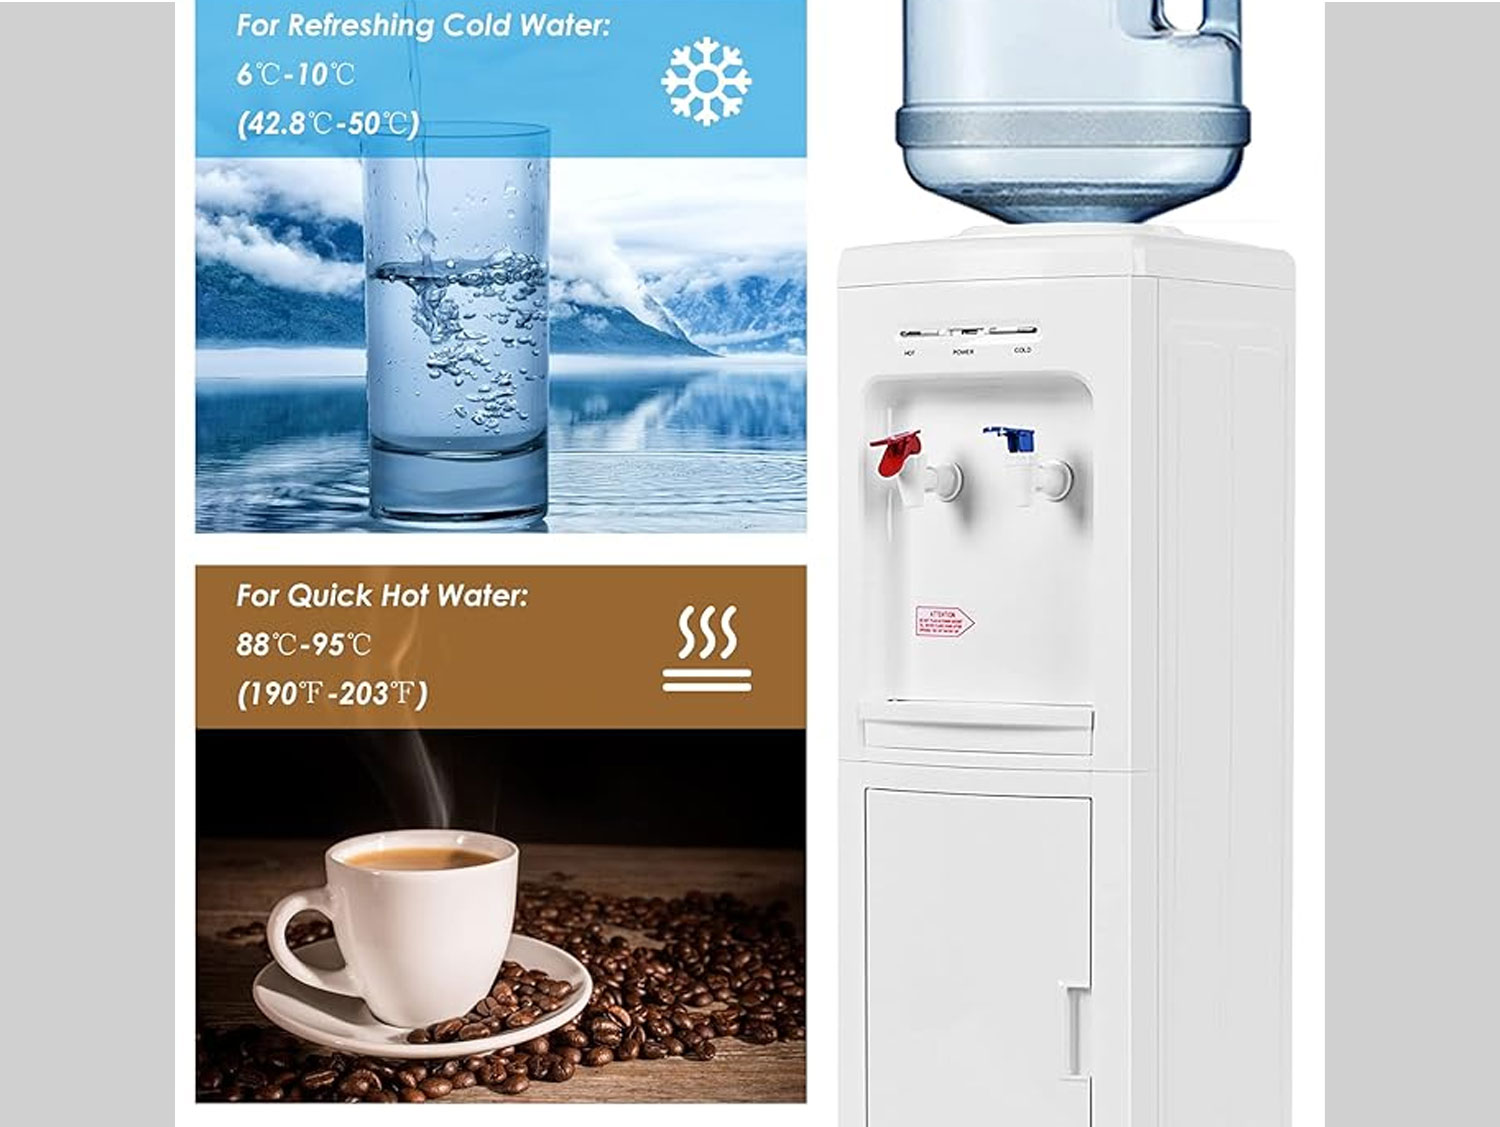 Safe and reliable water dispenser for Sri Lankan weddings